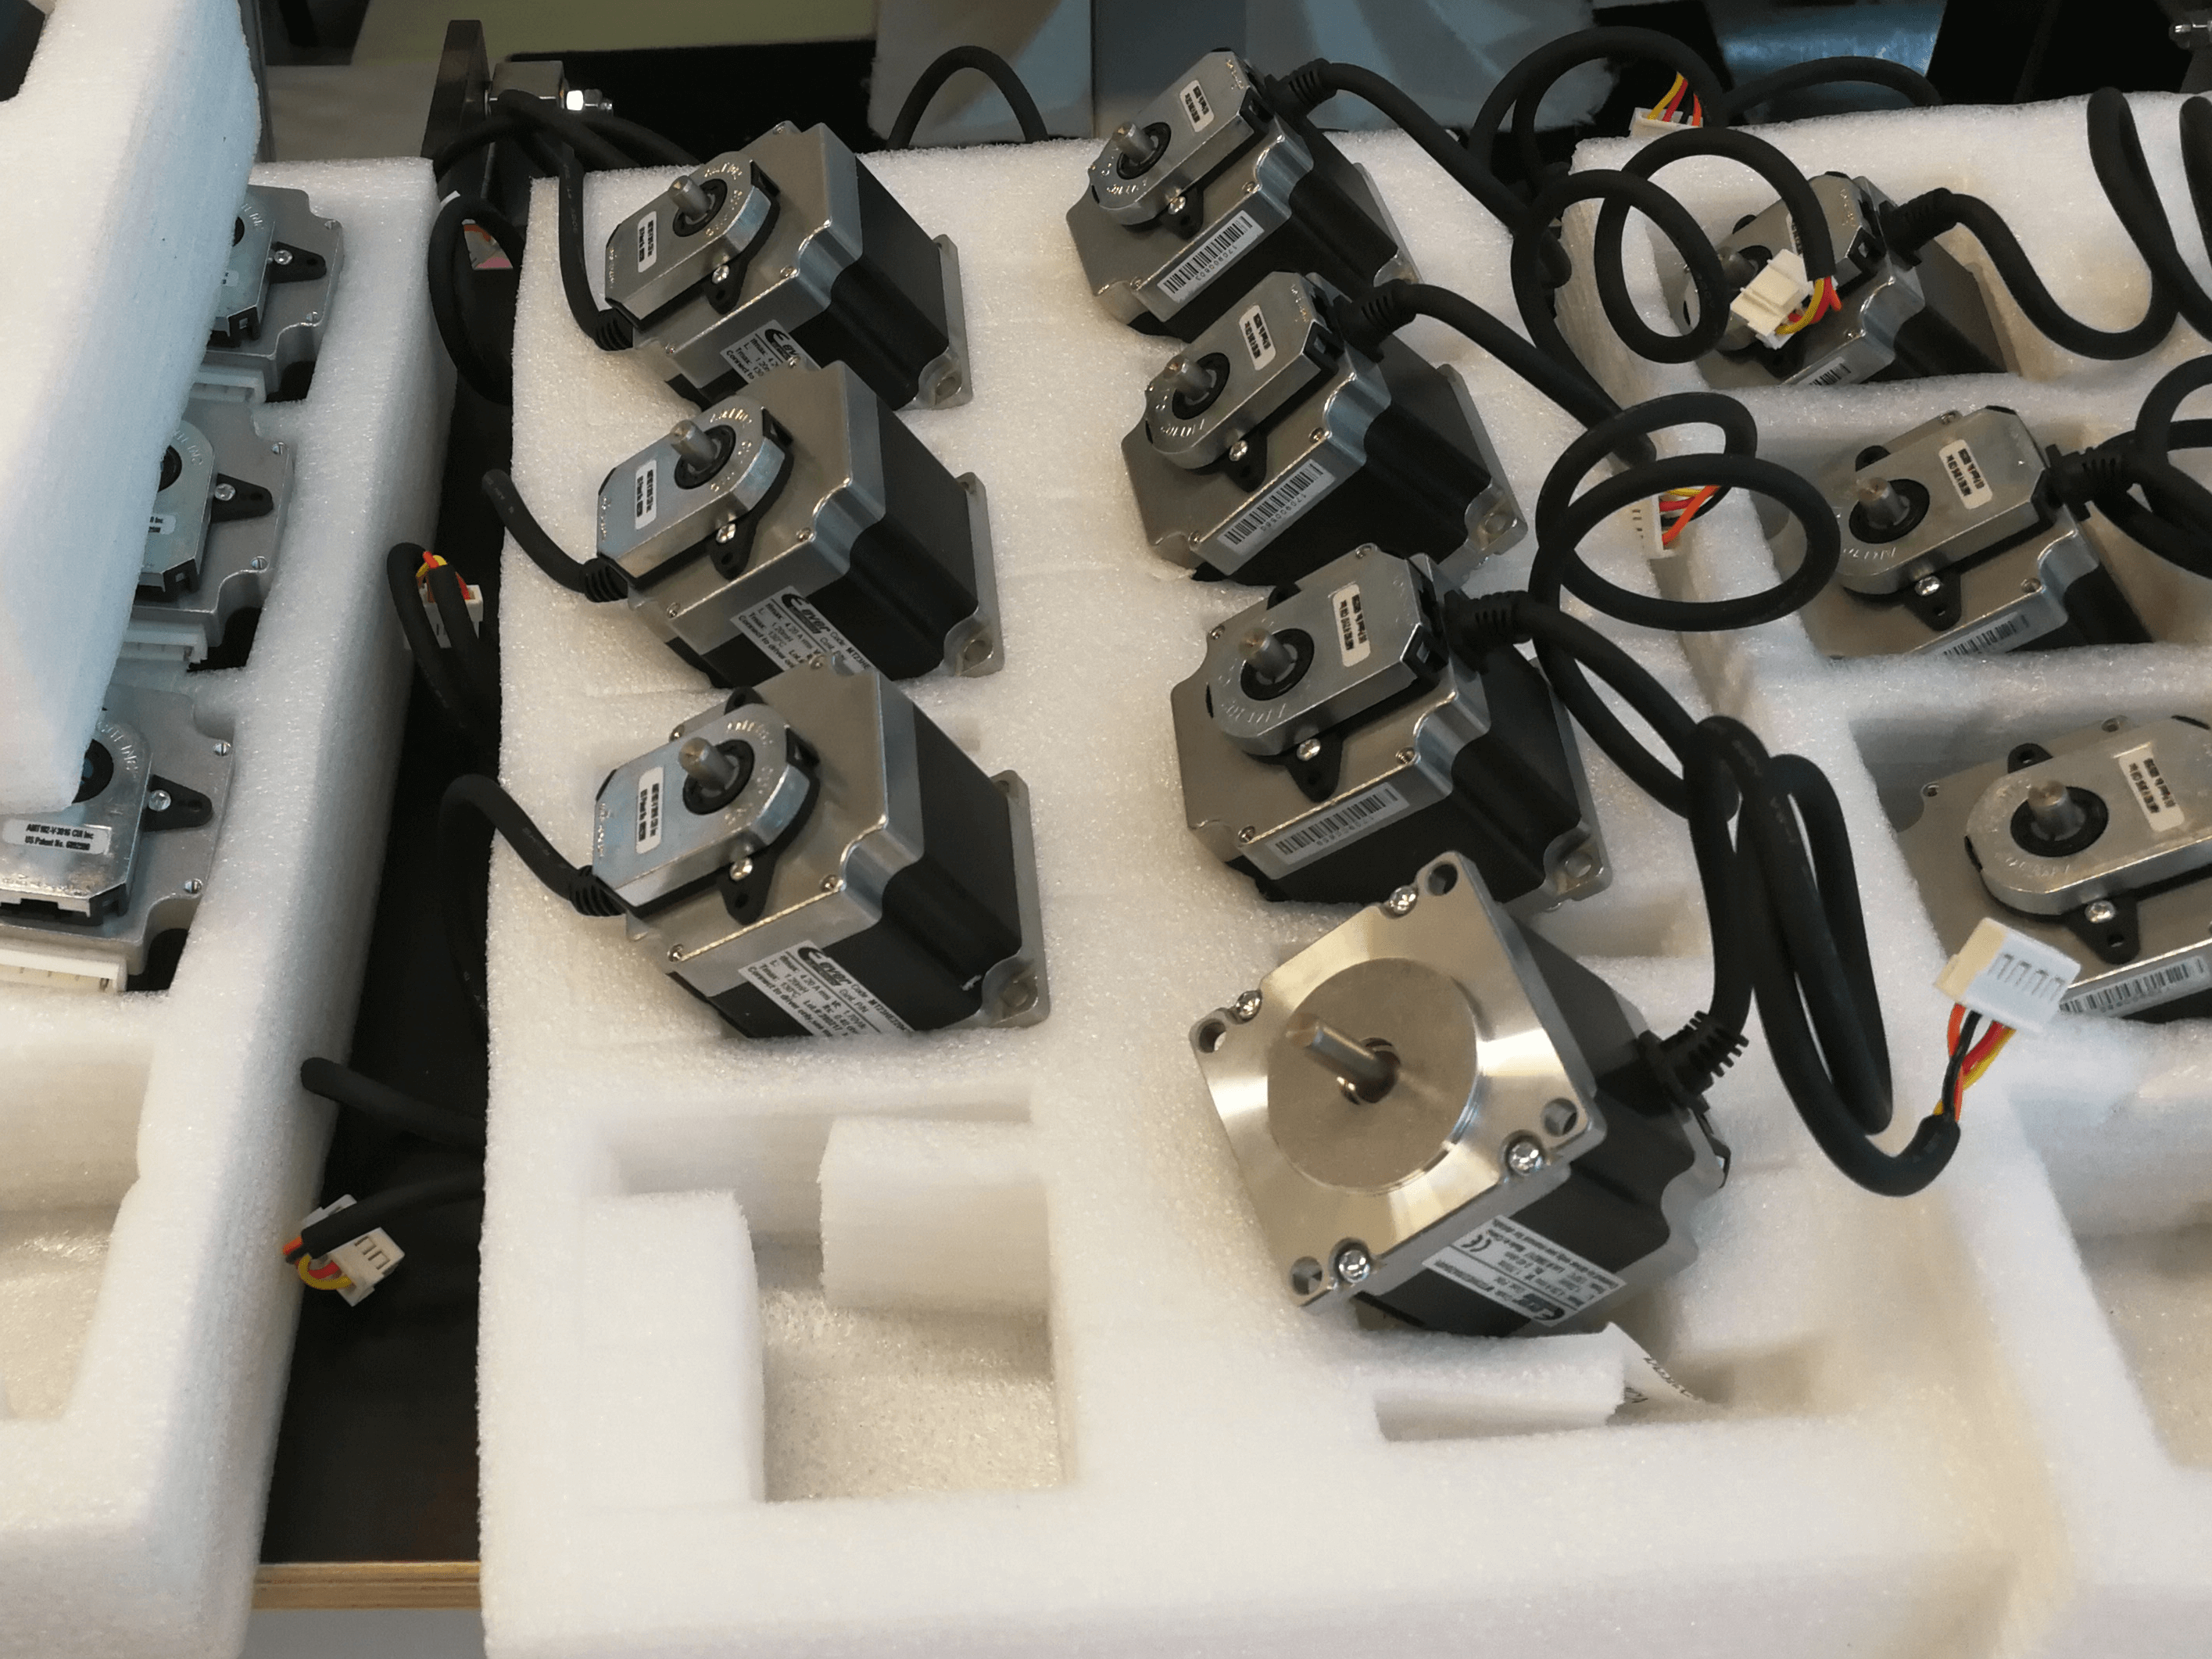 Stepper motors assembled with their respective rotary encoders arranged on foam containers